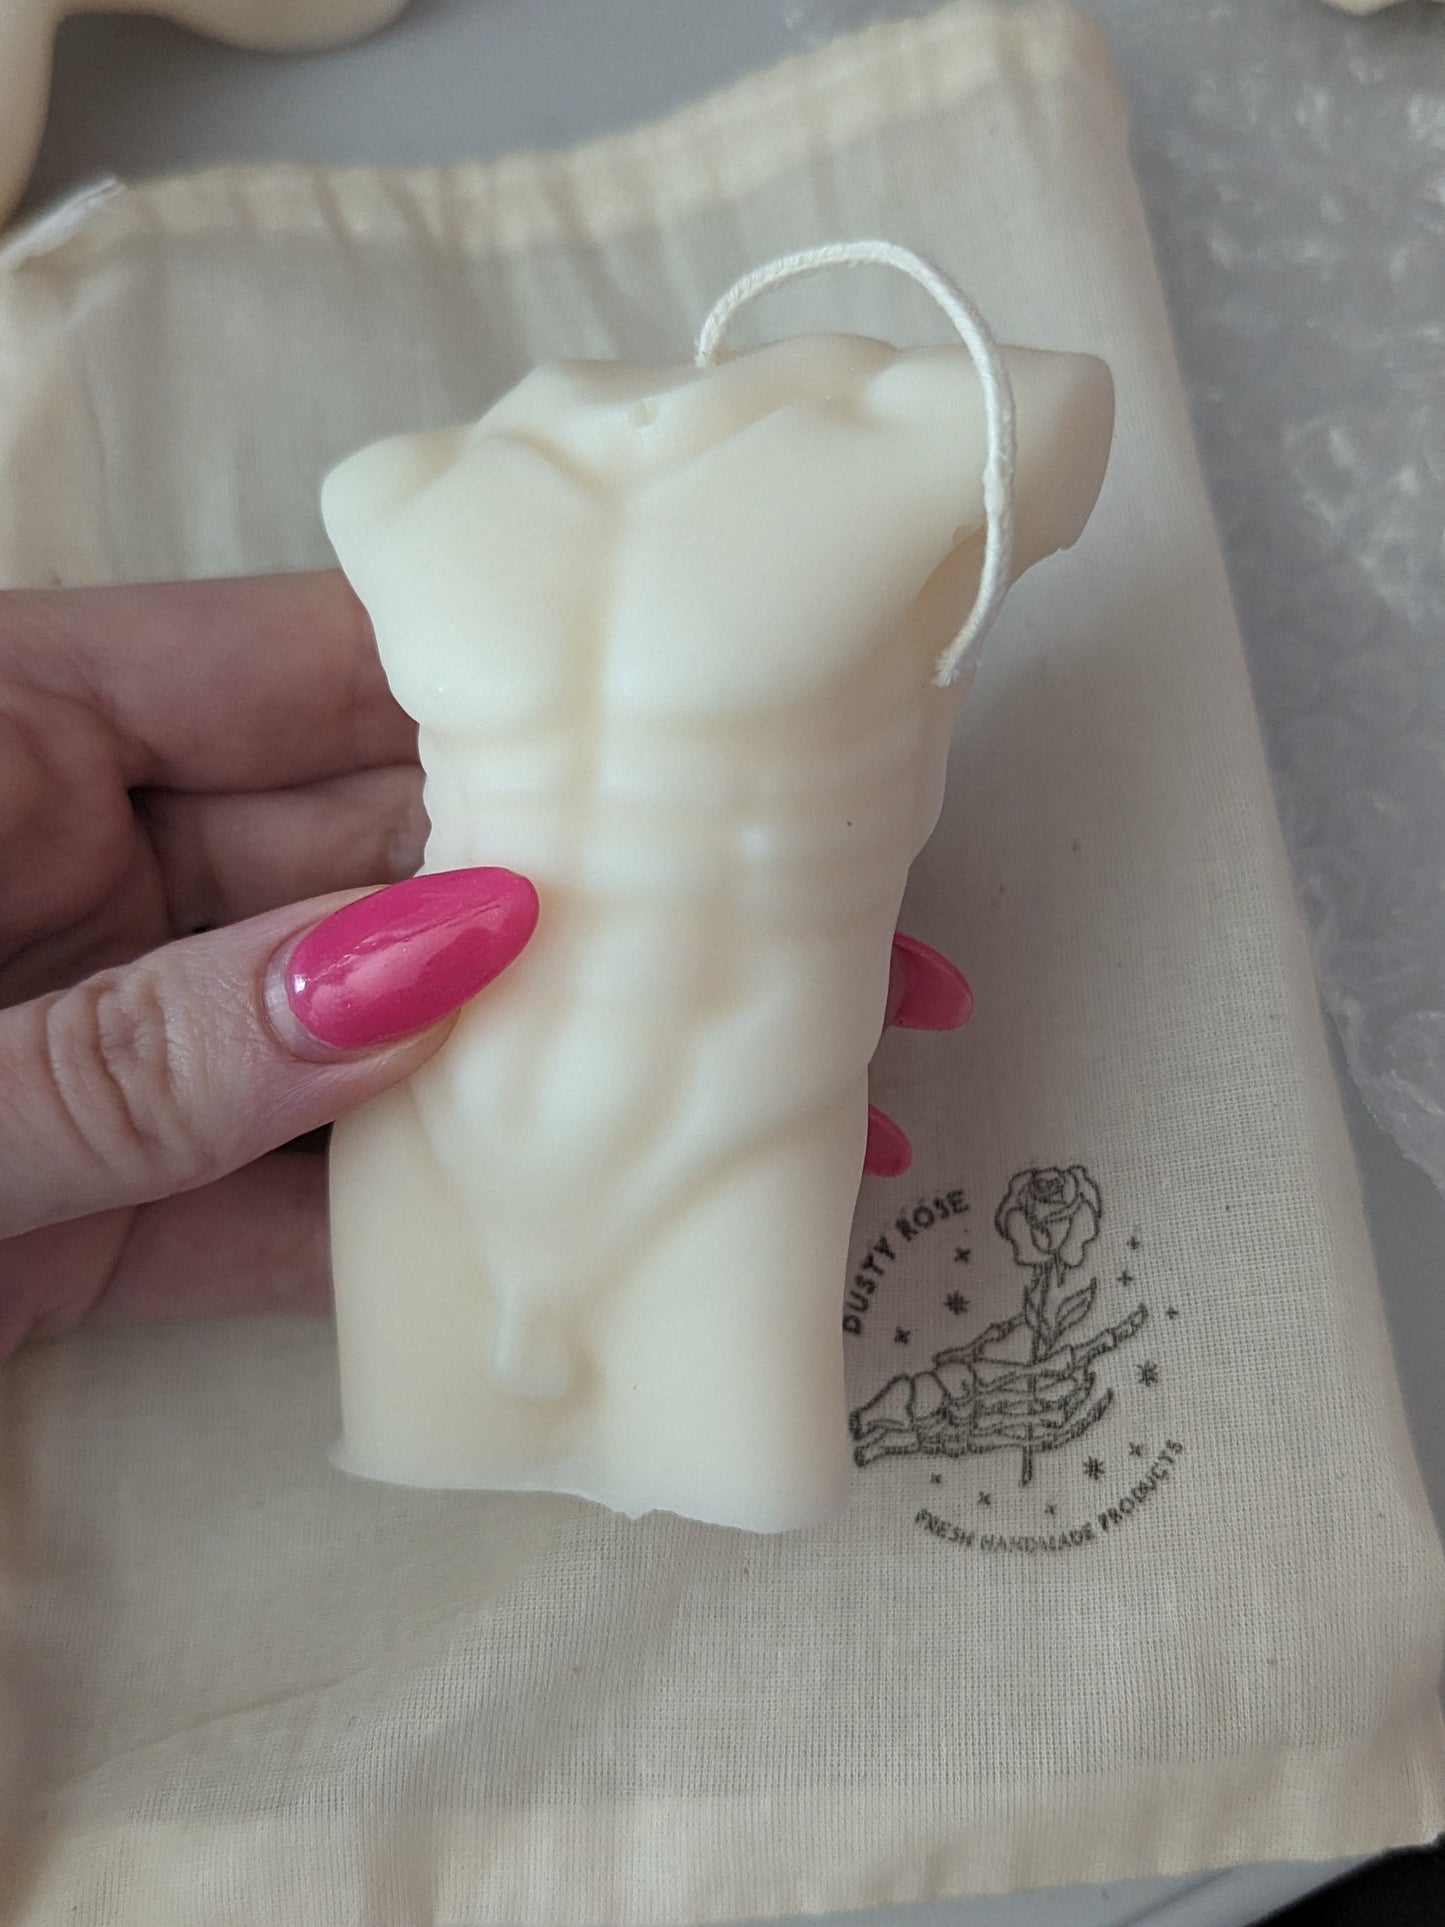 Naked Male Body Candle